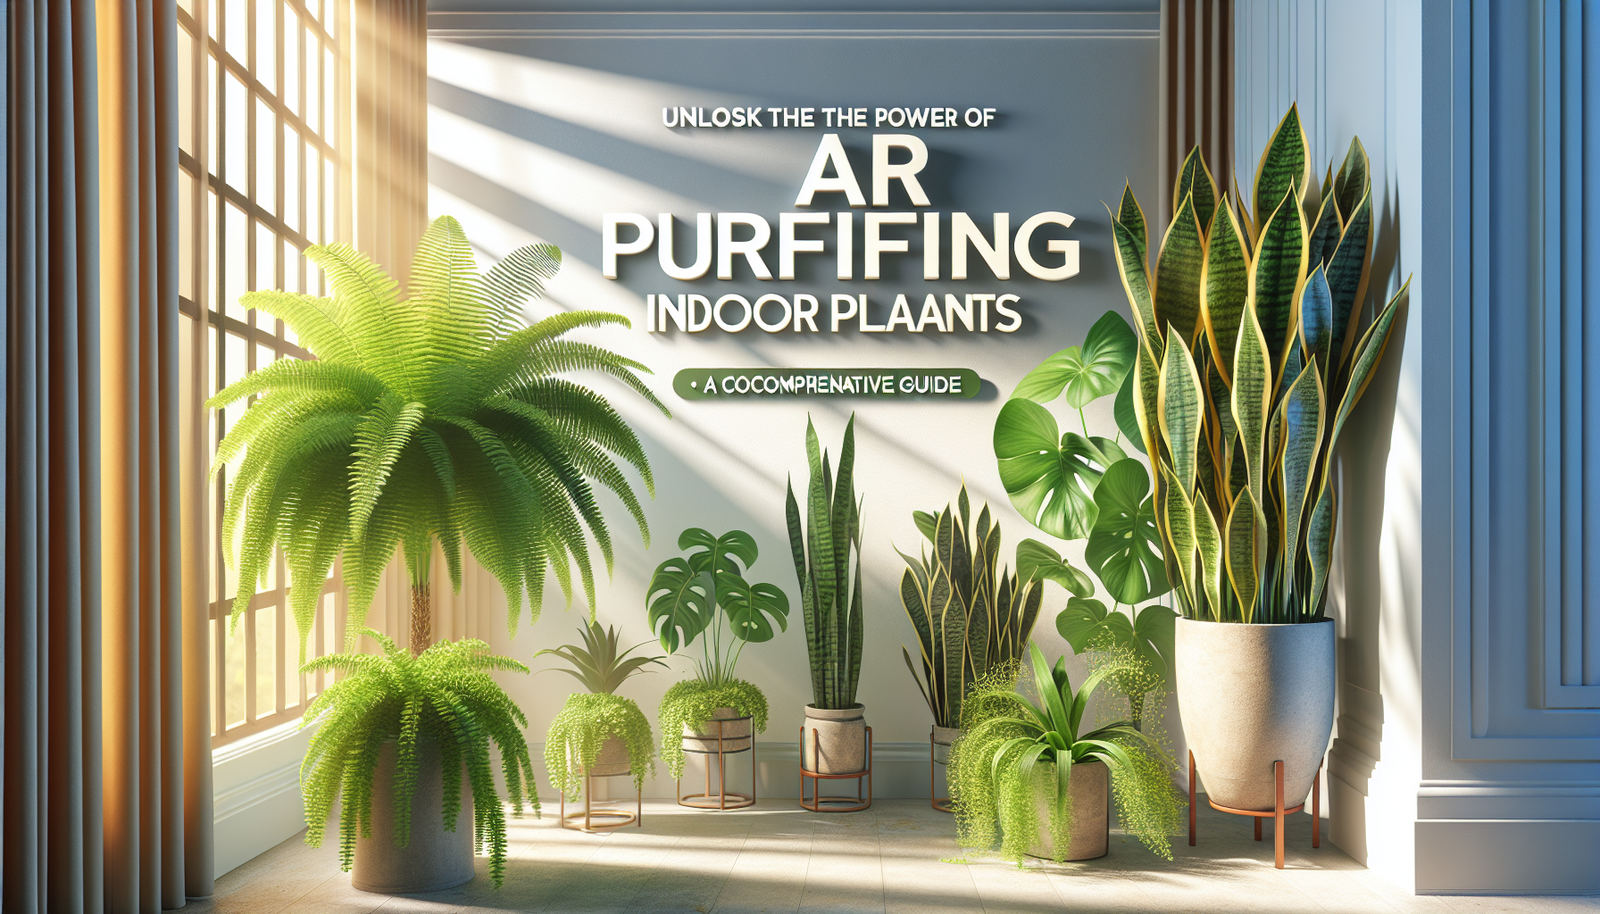 Unlock the Power of Air Purifying Indoor Plants: A Comprehensive Guide